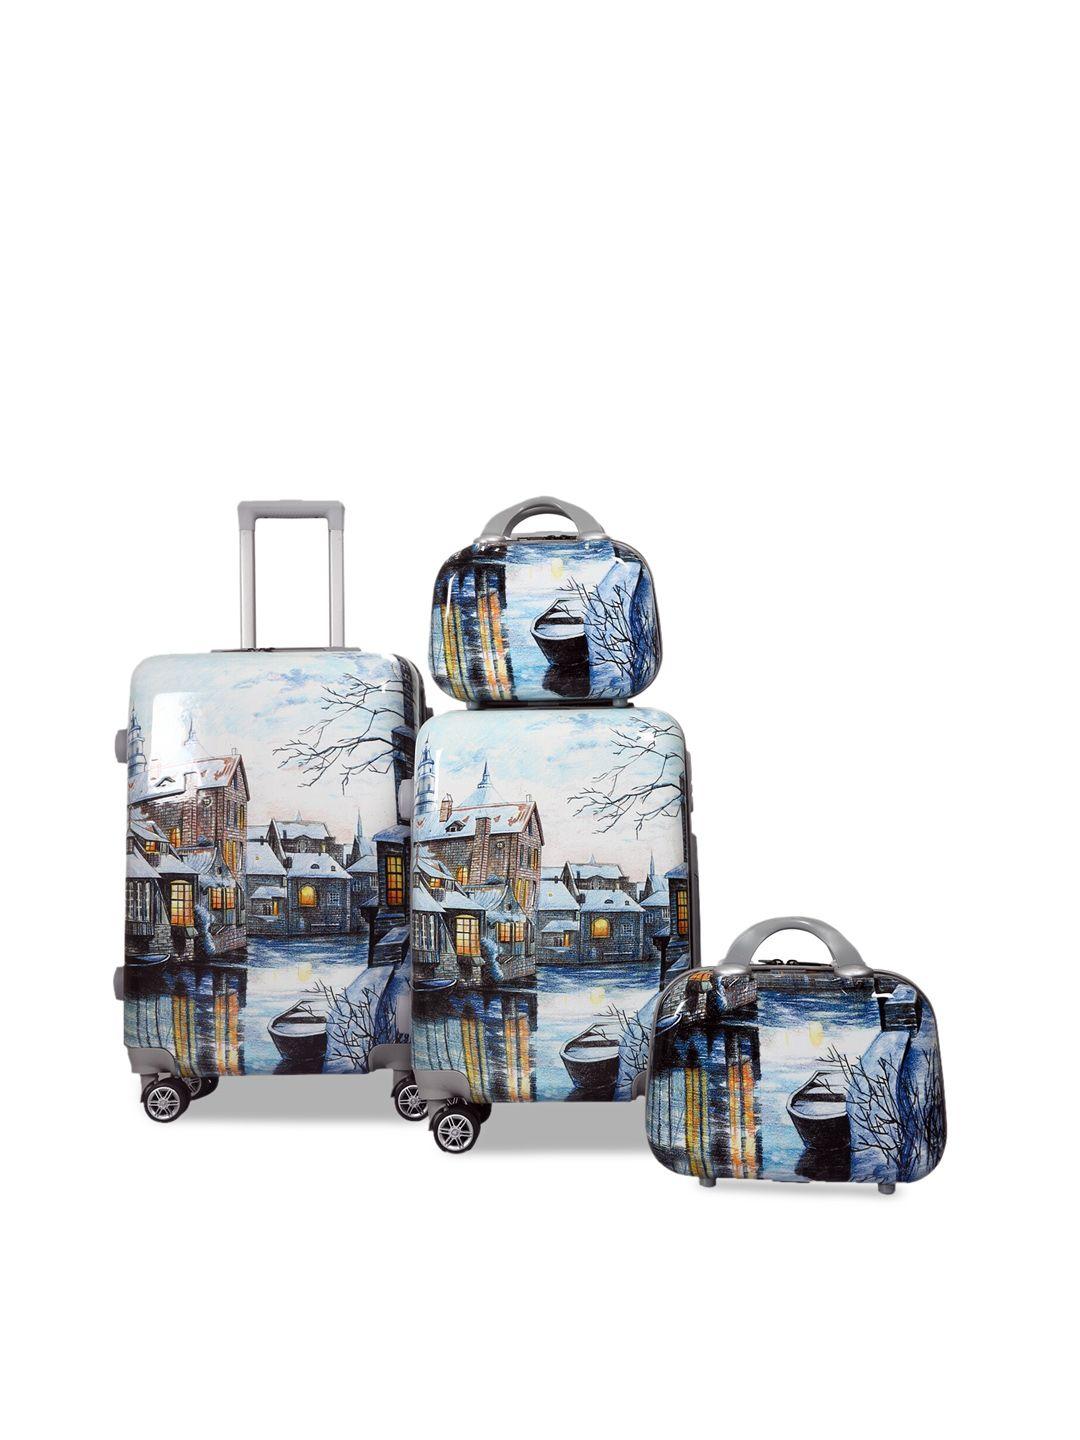 polo class set of 5 blue & white printed trolley suitcase with vanity bag